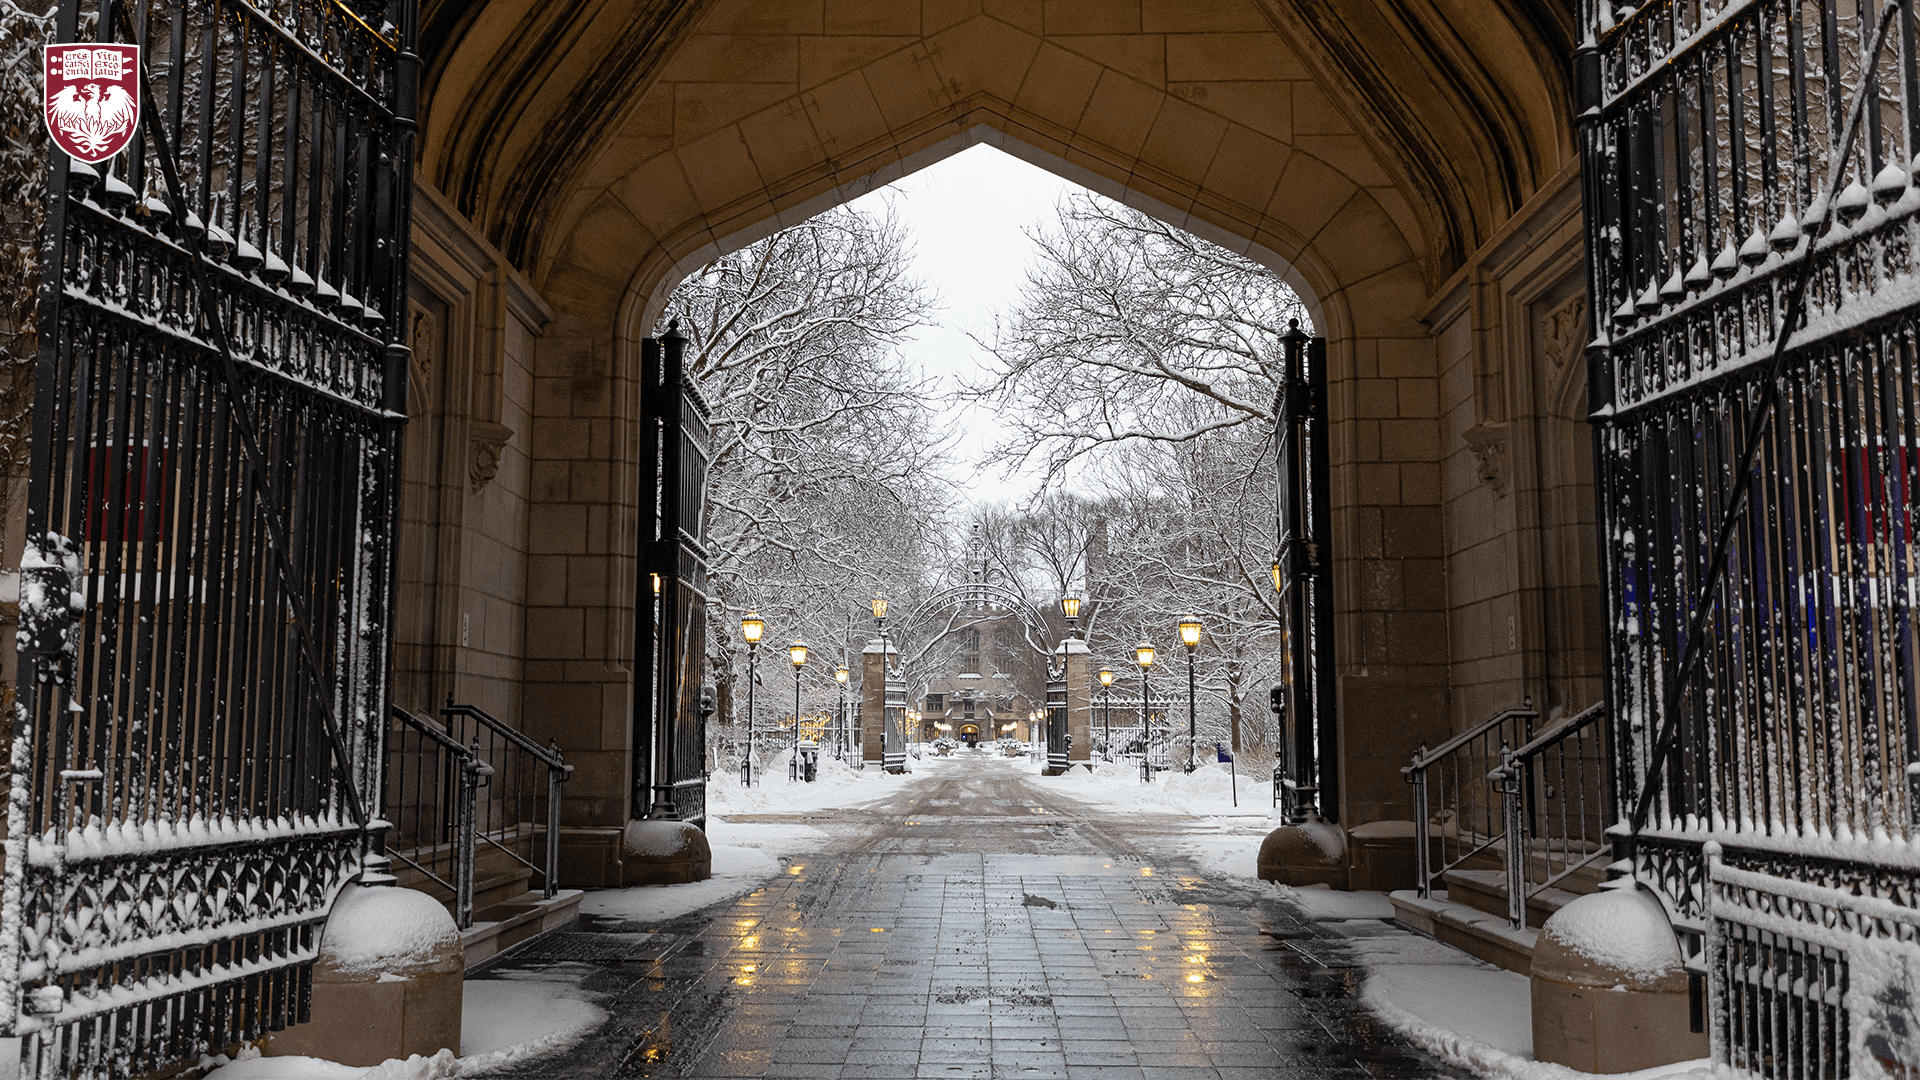 Looking through an open gate and building arch onto snowy walkway, trees, and glowing street lamps